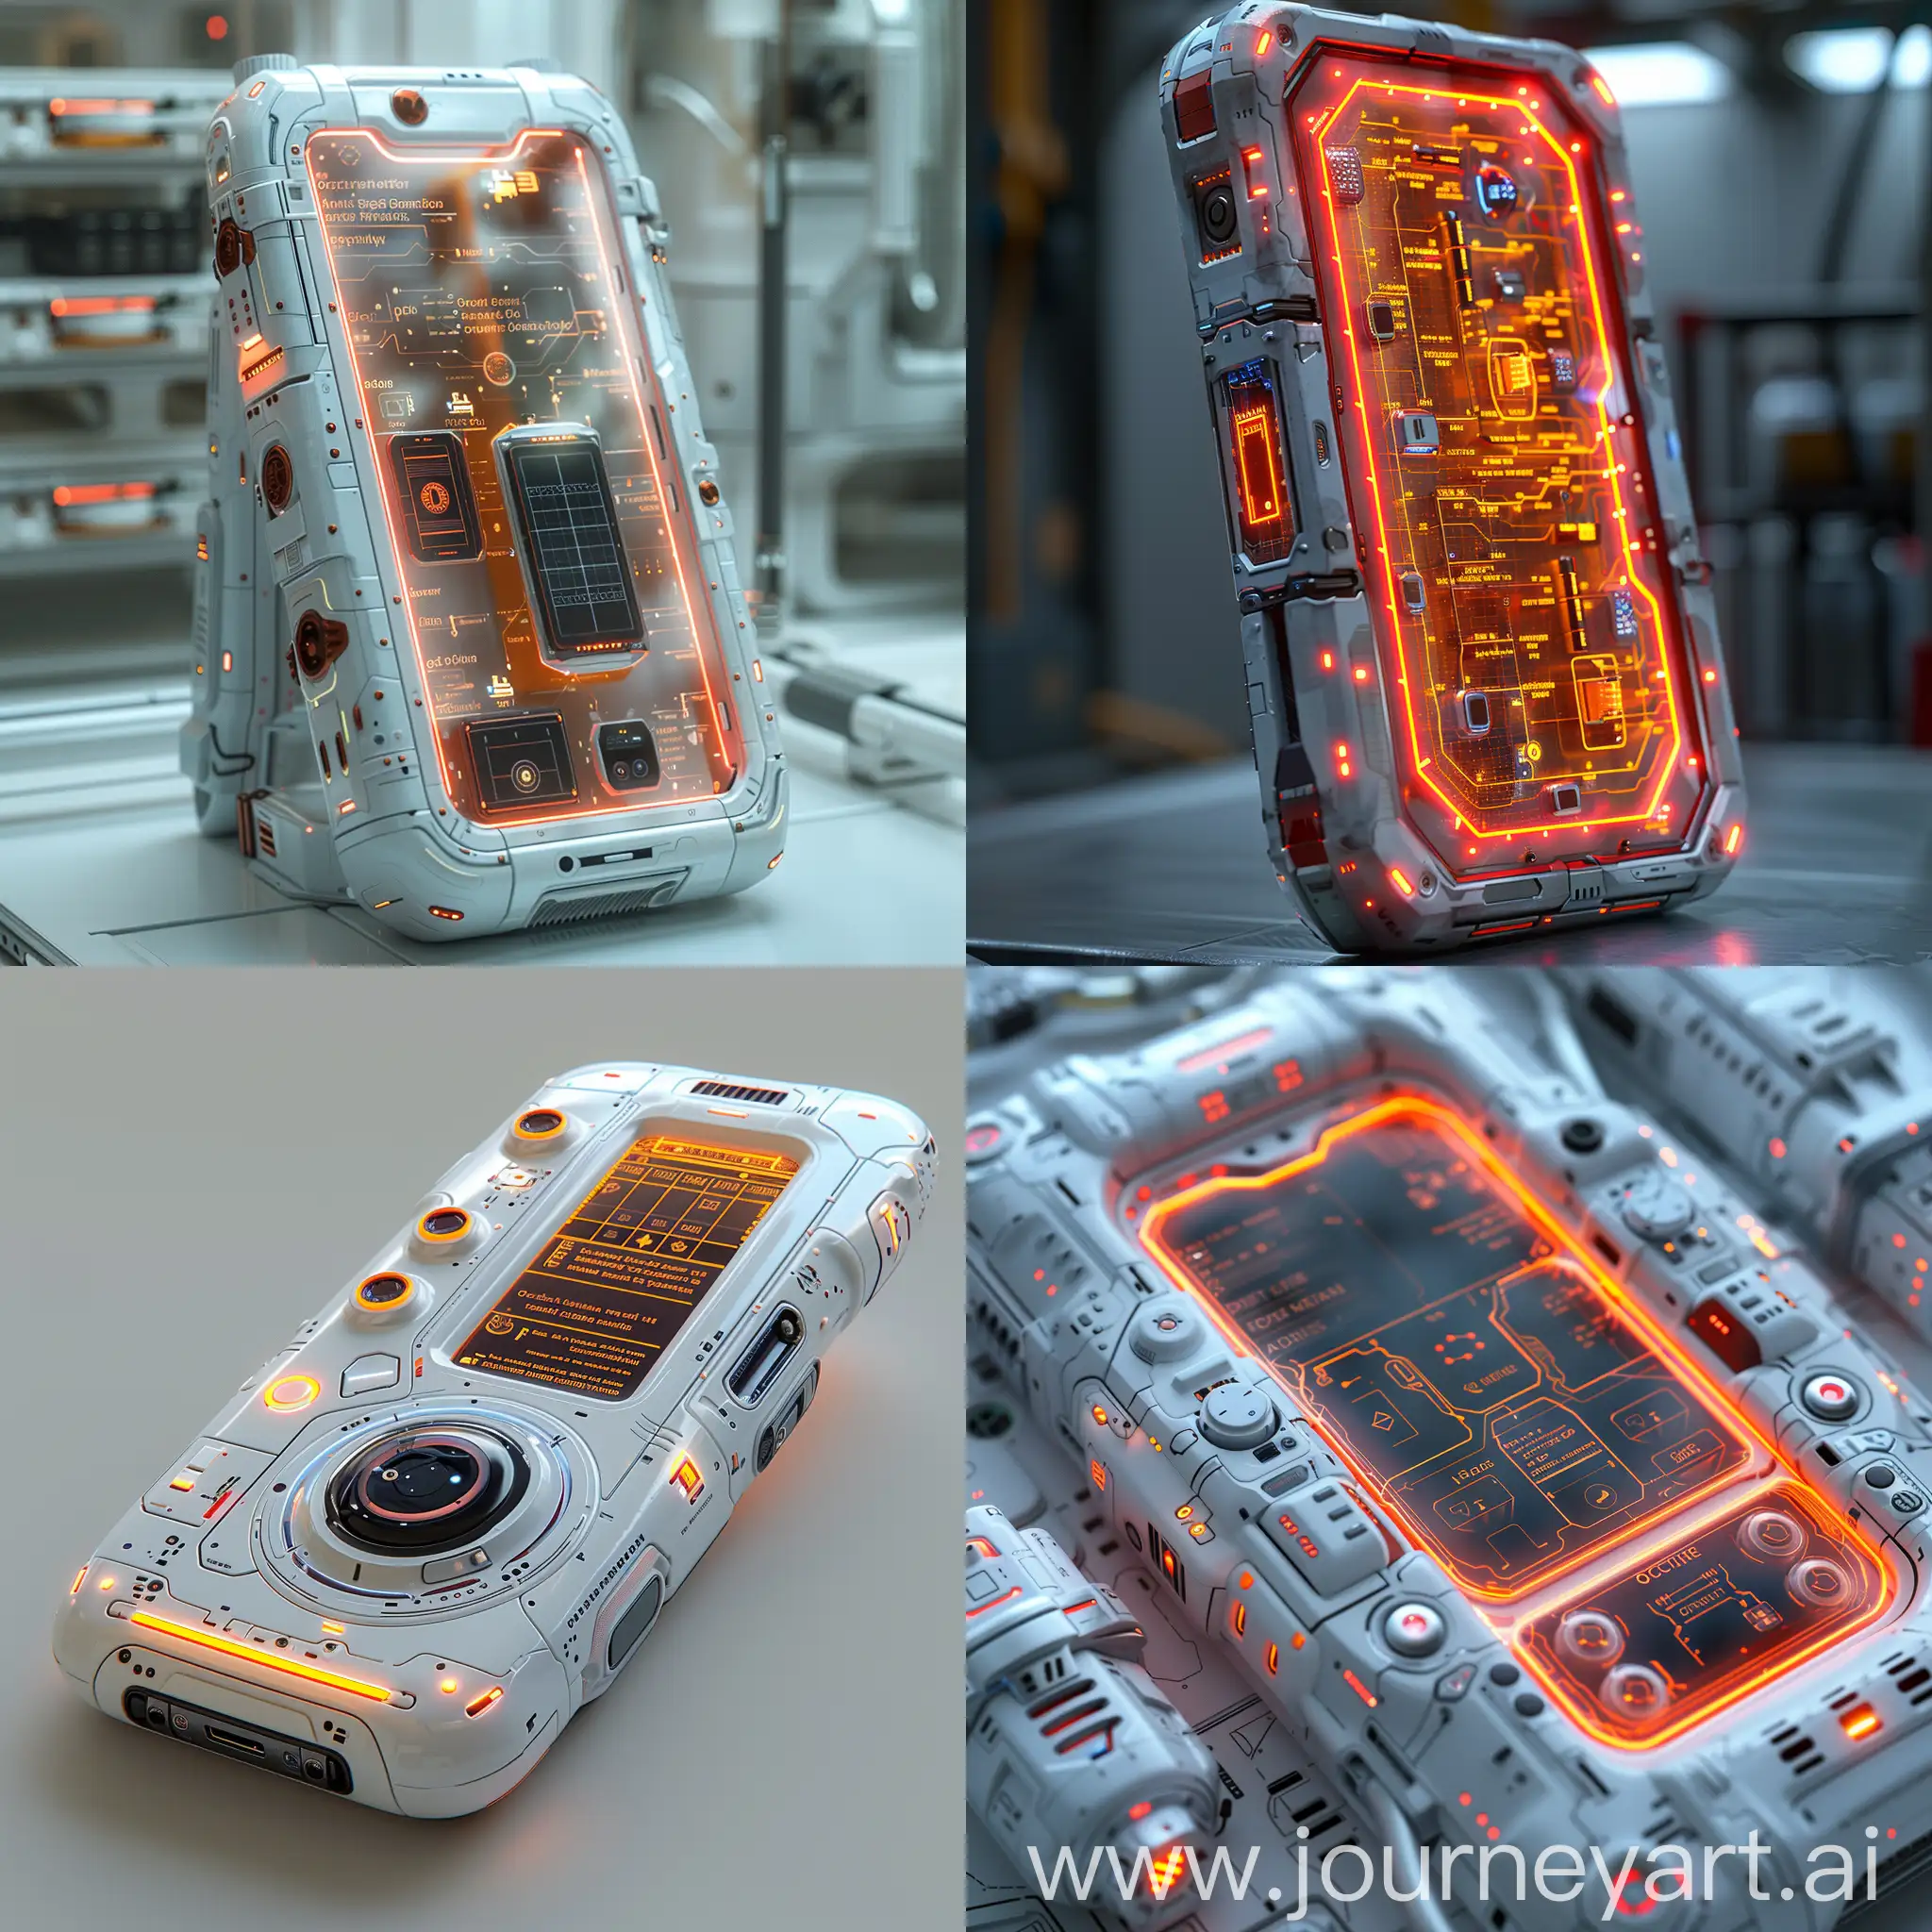 Futuristic-Smartphone-with-Biodegradable-Materials-and-Solar-Charging